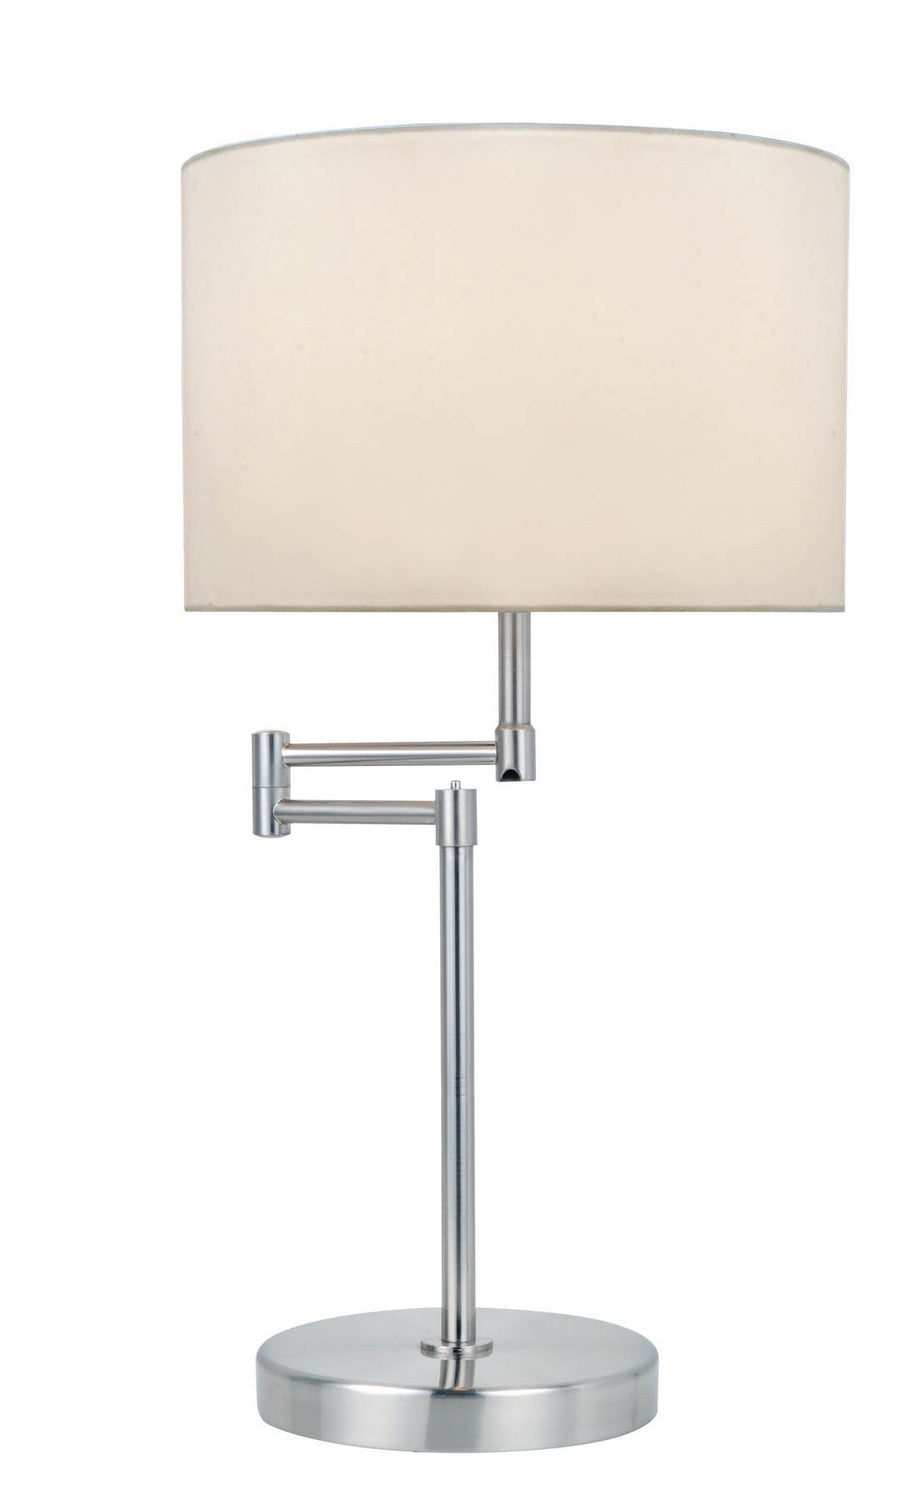 Durango Table Lamp in Polished Steel with White Fabric Shade, E27 Type A 60W